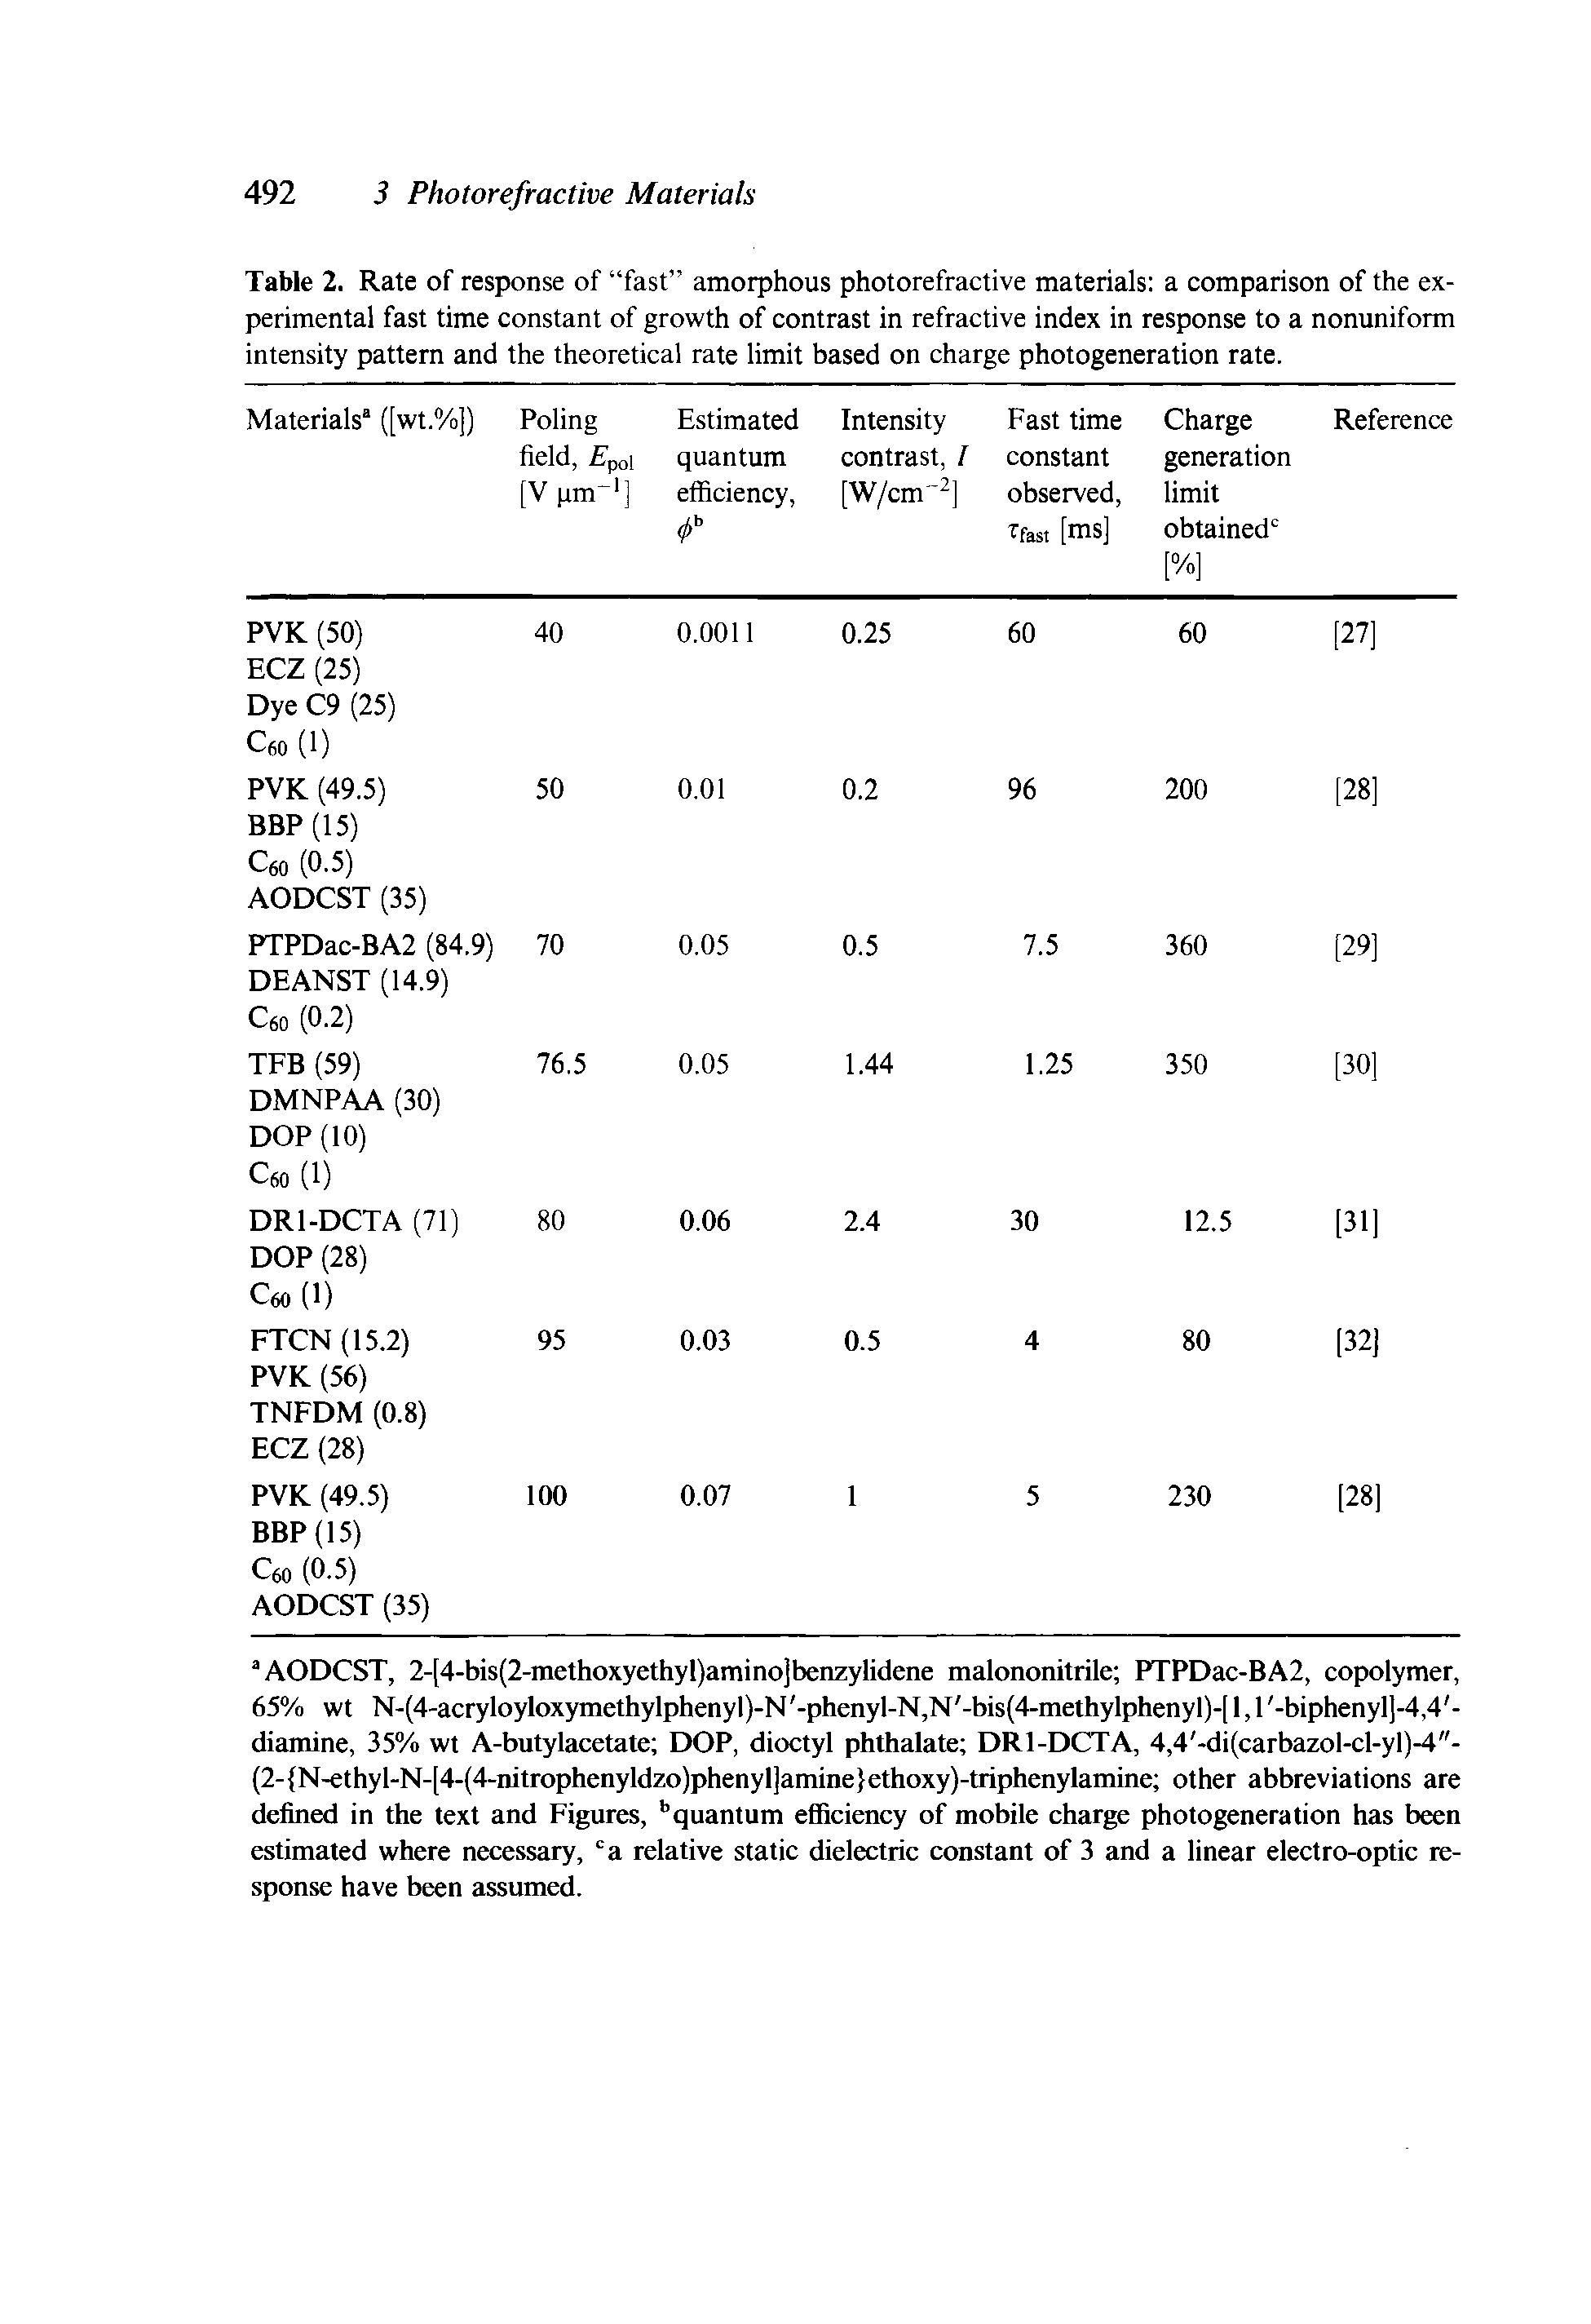 Table 2. Rate of response of fast amorphous photorefractive materials a comparison of the experimental fast time constant of growth of contrast in refractive index in response to a nonuniform intensity pattern and the theoretical rate limit based on charge photogeneration rate.